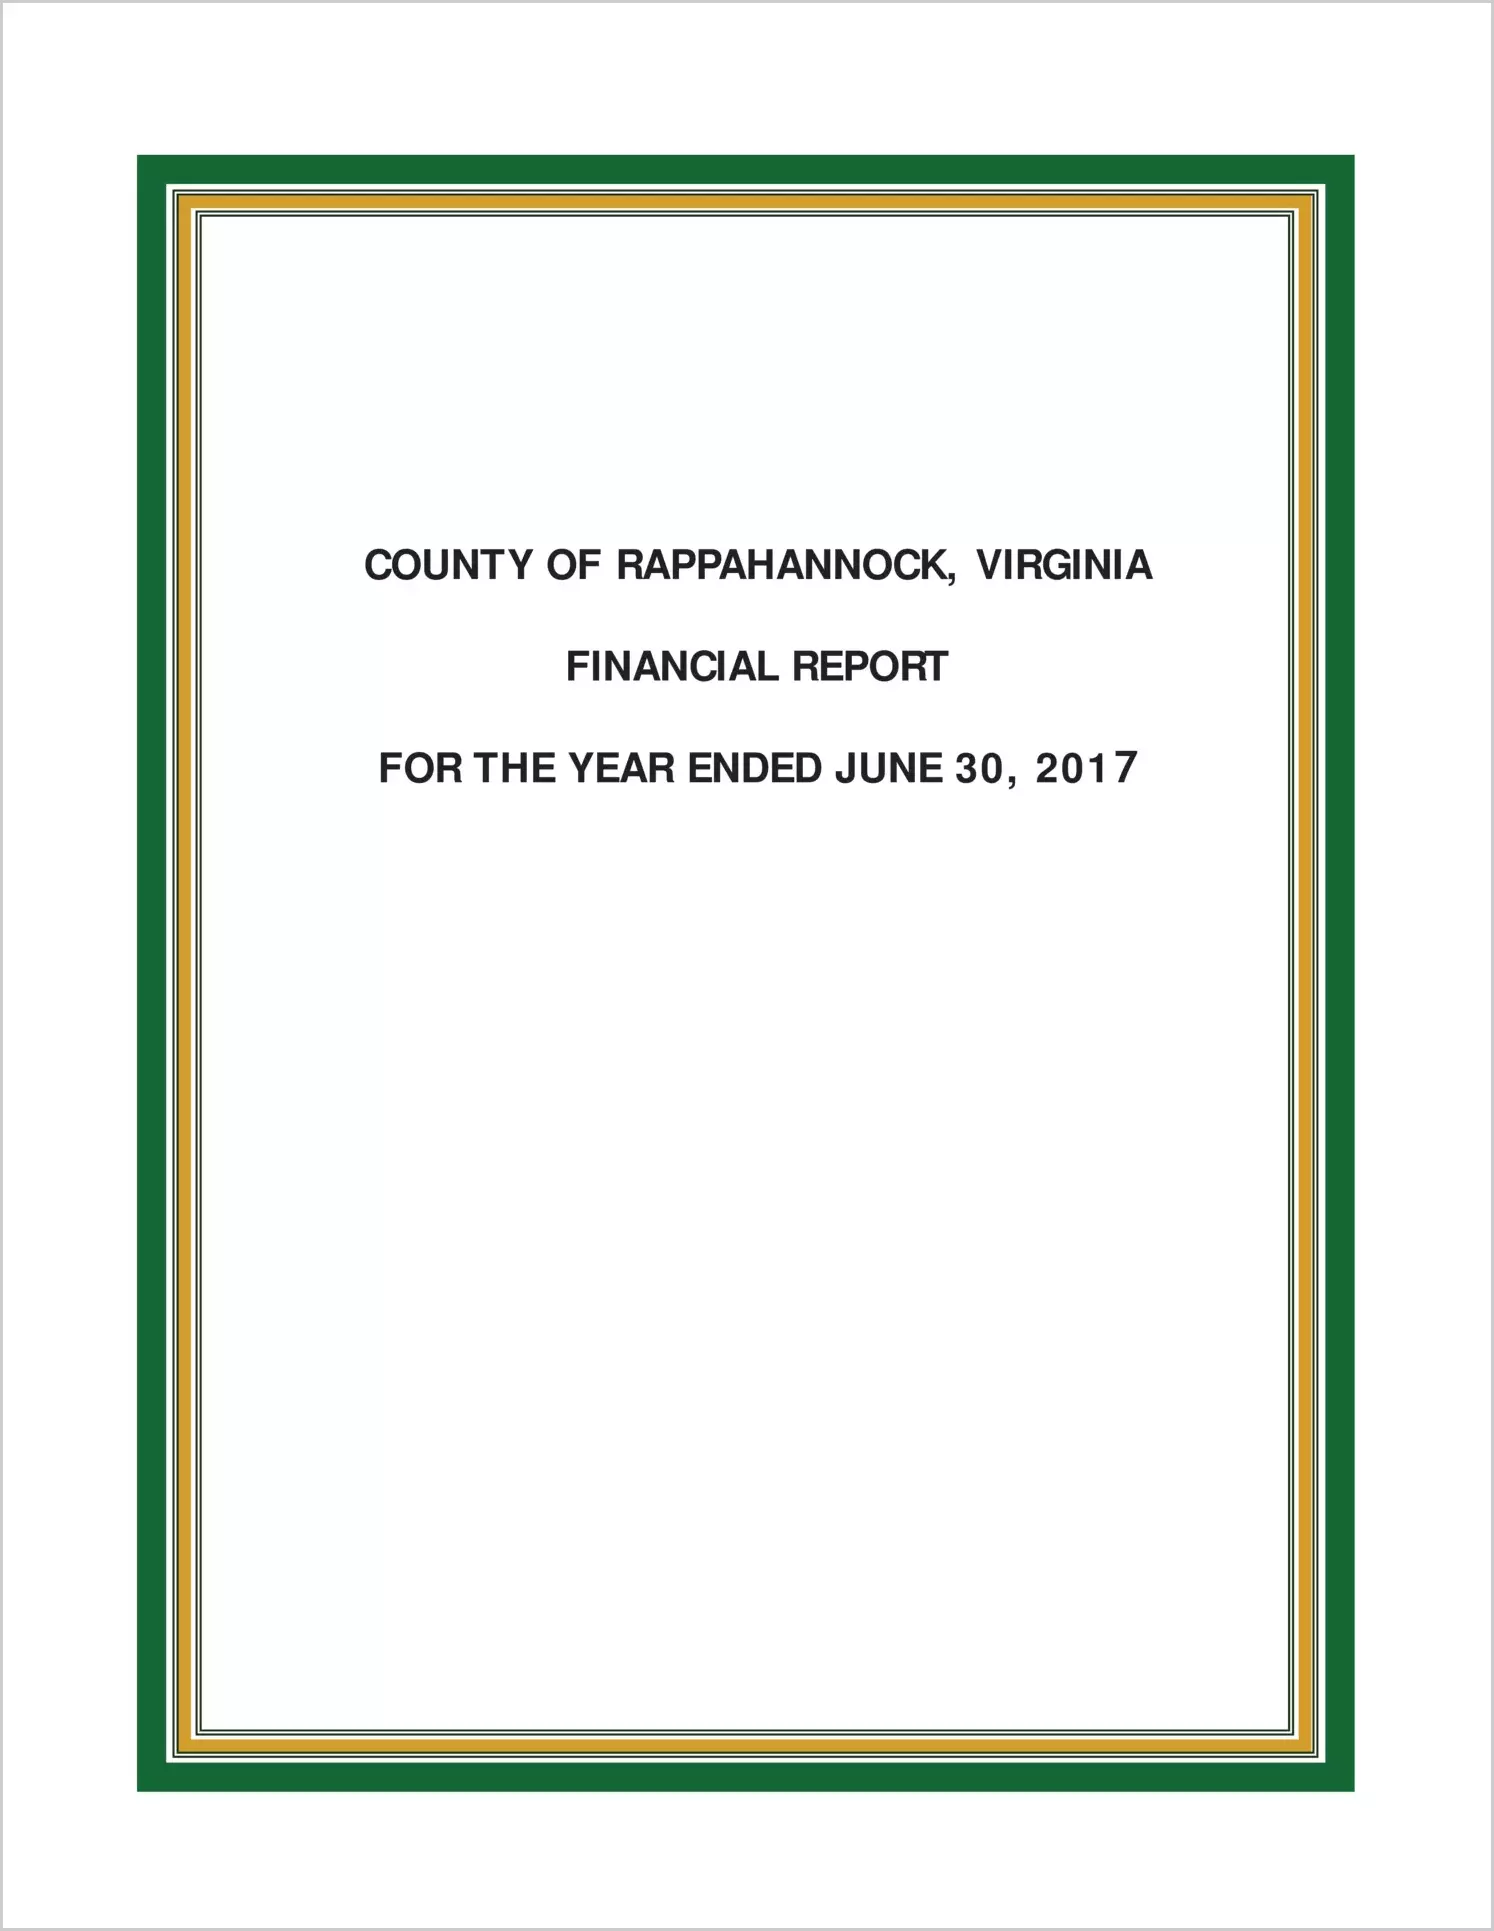 2017 Annual Financial Report for County of Rappahannock